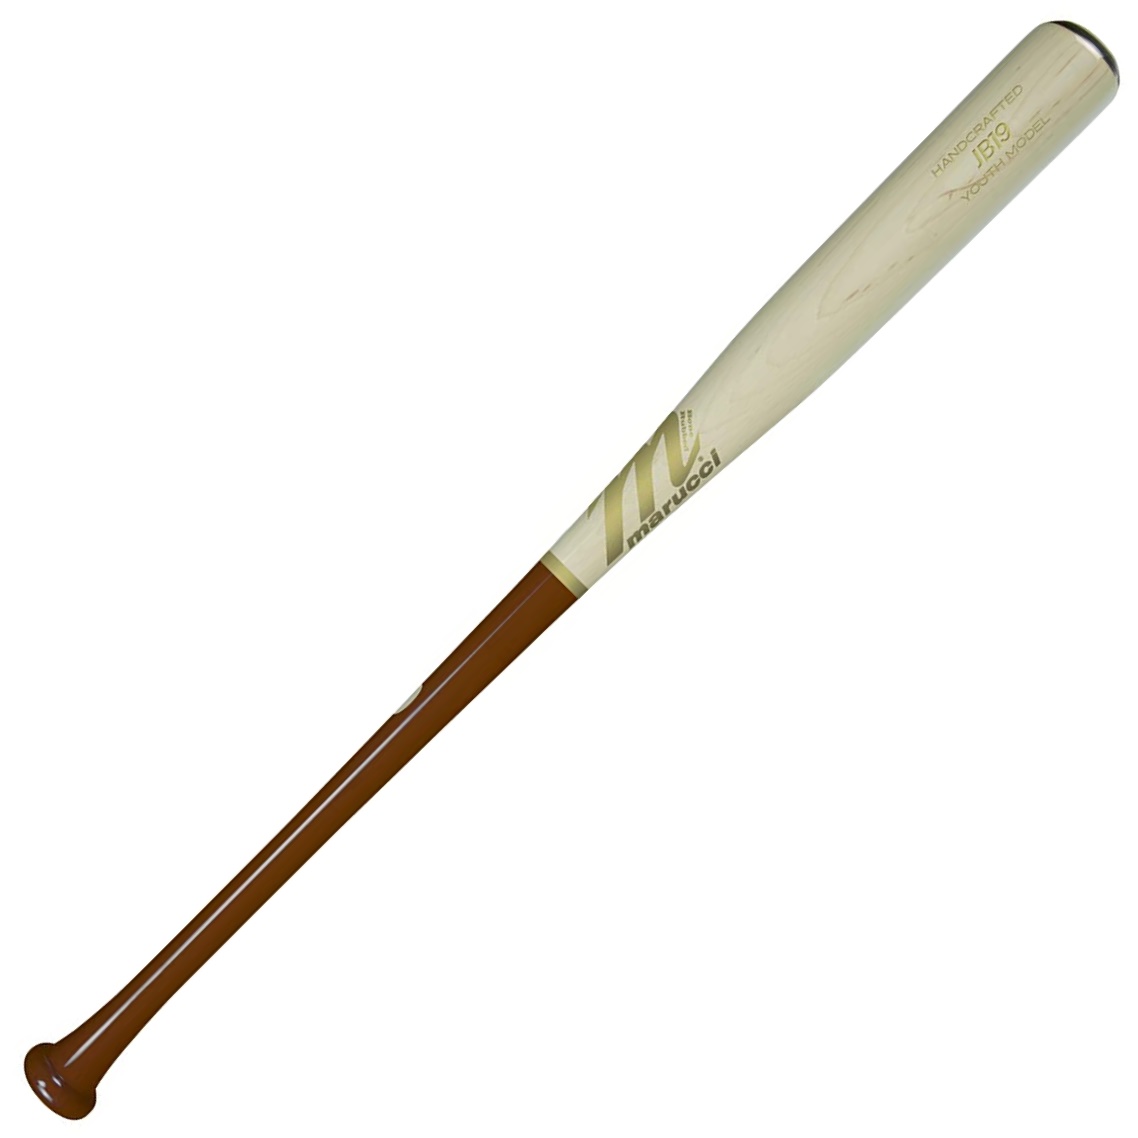 he versatile bat for the versatile hitter. We know your kind. You can go up top at any moment, but you feel just as comfortable spraying liners in the gaps. The Marucci JB19 Pro Model wood baseball bat keeps the balanced feel with a long barrel and medium handle. Comes with a 30 day warranty from Marucci. - Youth Model - Knob: Traditional - Handle: Medium - Barrel: Medium - Feel: Balanced - Handcrafted from Marucci's top-quality maple - Bone rubbed for ultimate wood density - Big League-grade Ink Dot certified.